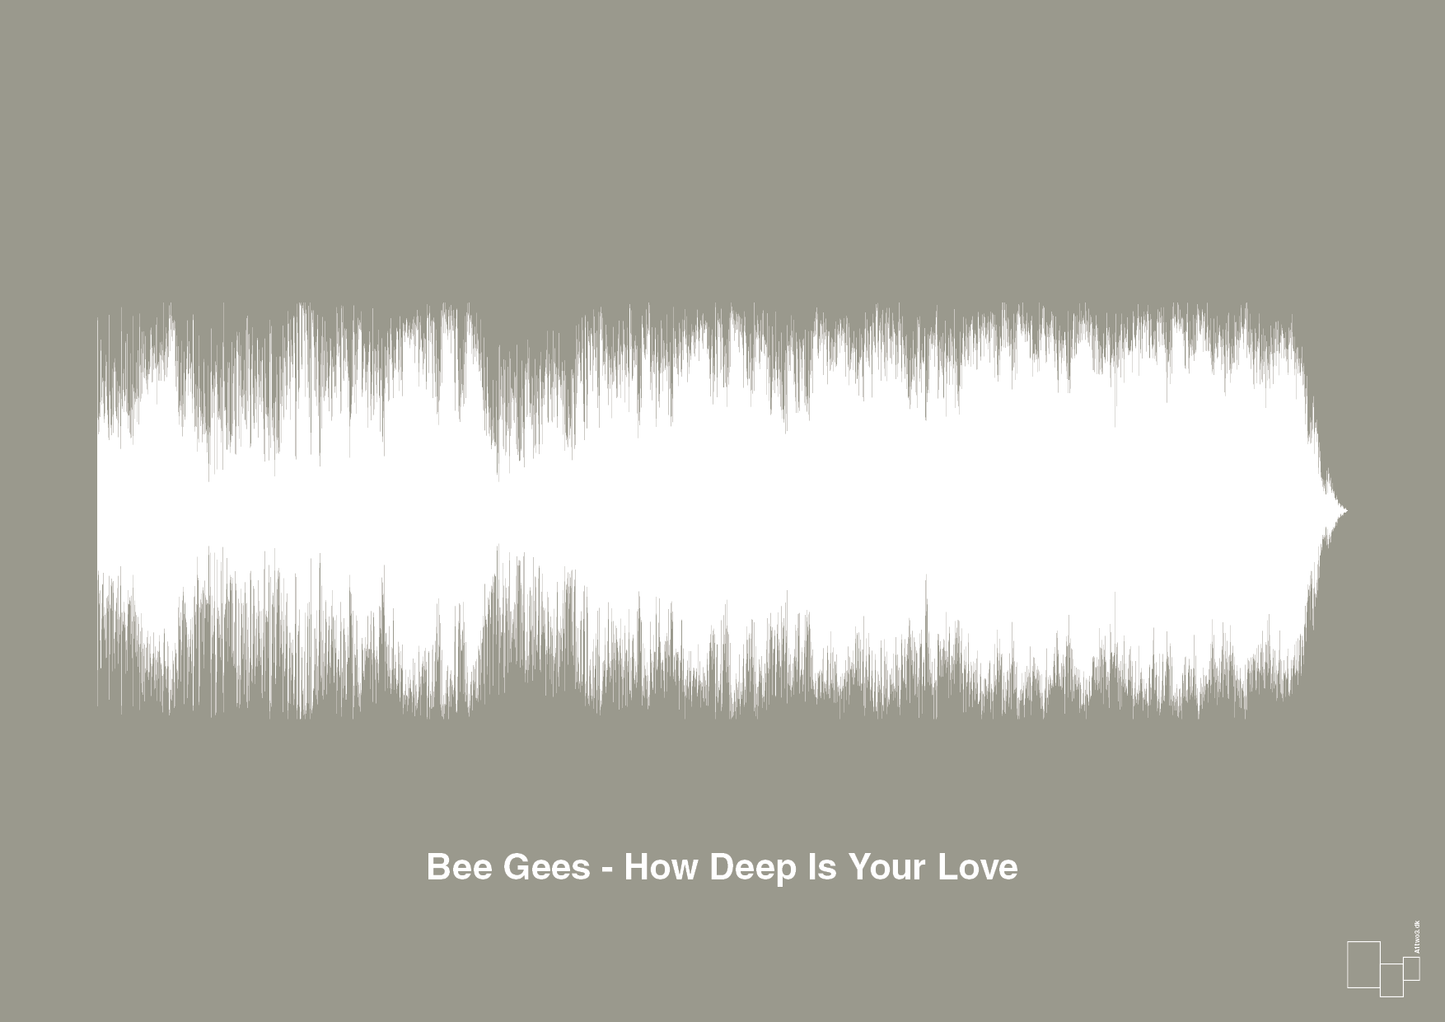 bee gees - how deep is your love - Plakat med Musik i Battleship Gray